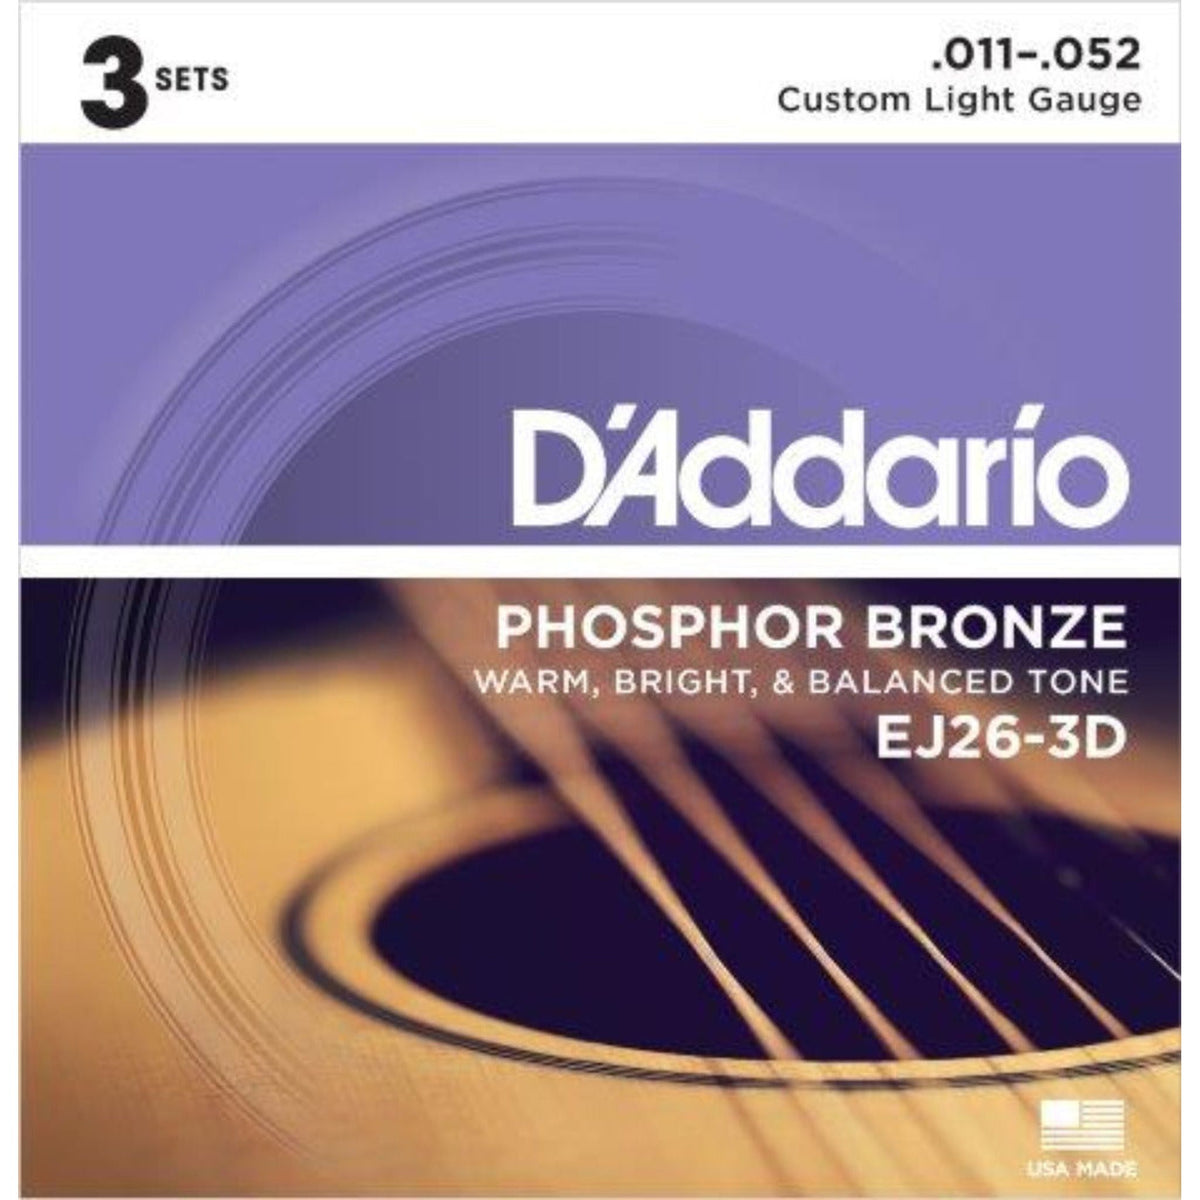 The D&#39;Addario EJ26 Acoustic Guitar String Set, also Referred to as Custom Light, EJ26 strings are a D&#39;Addario original hybrid gauge and a comfortable compromise for players who want the depth and projection of light gauge bottom strings, but slightly less tension on the high strings for easy bending. 